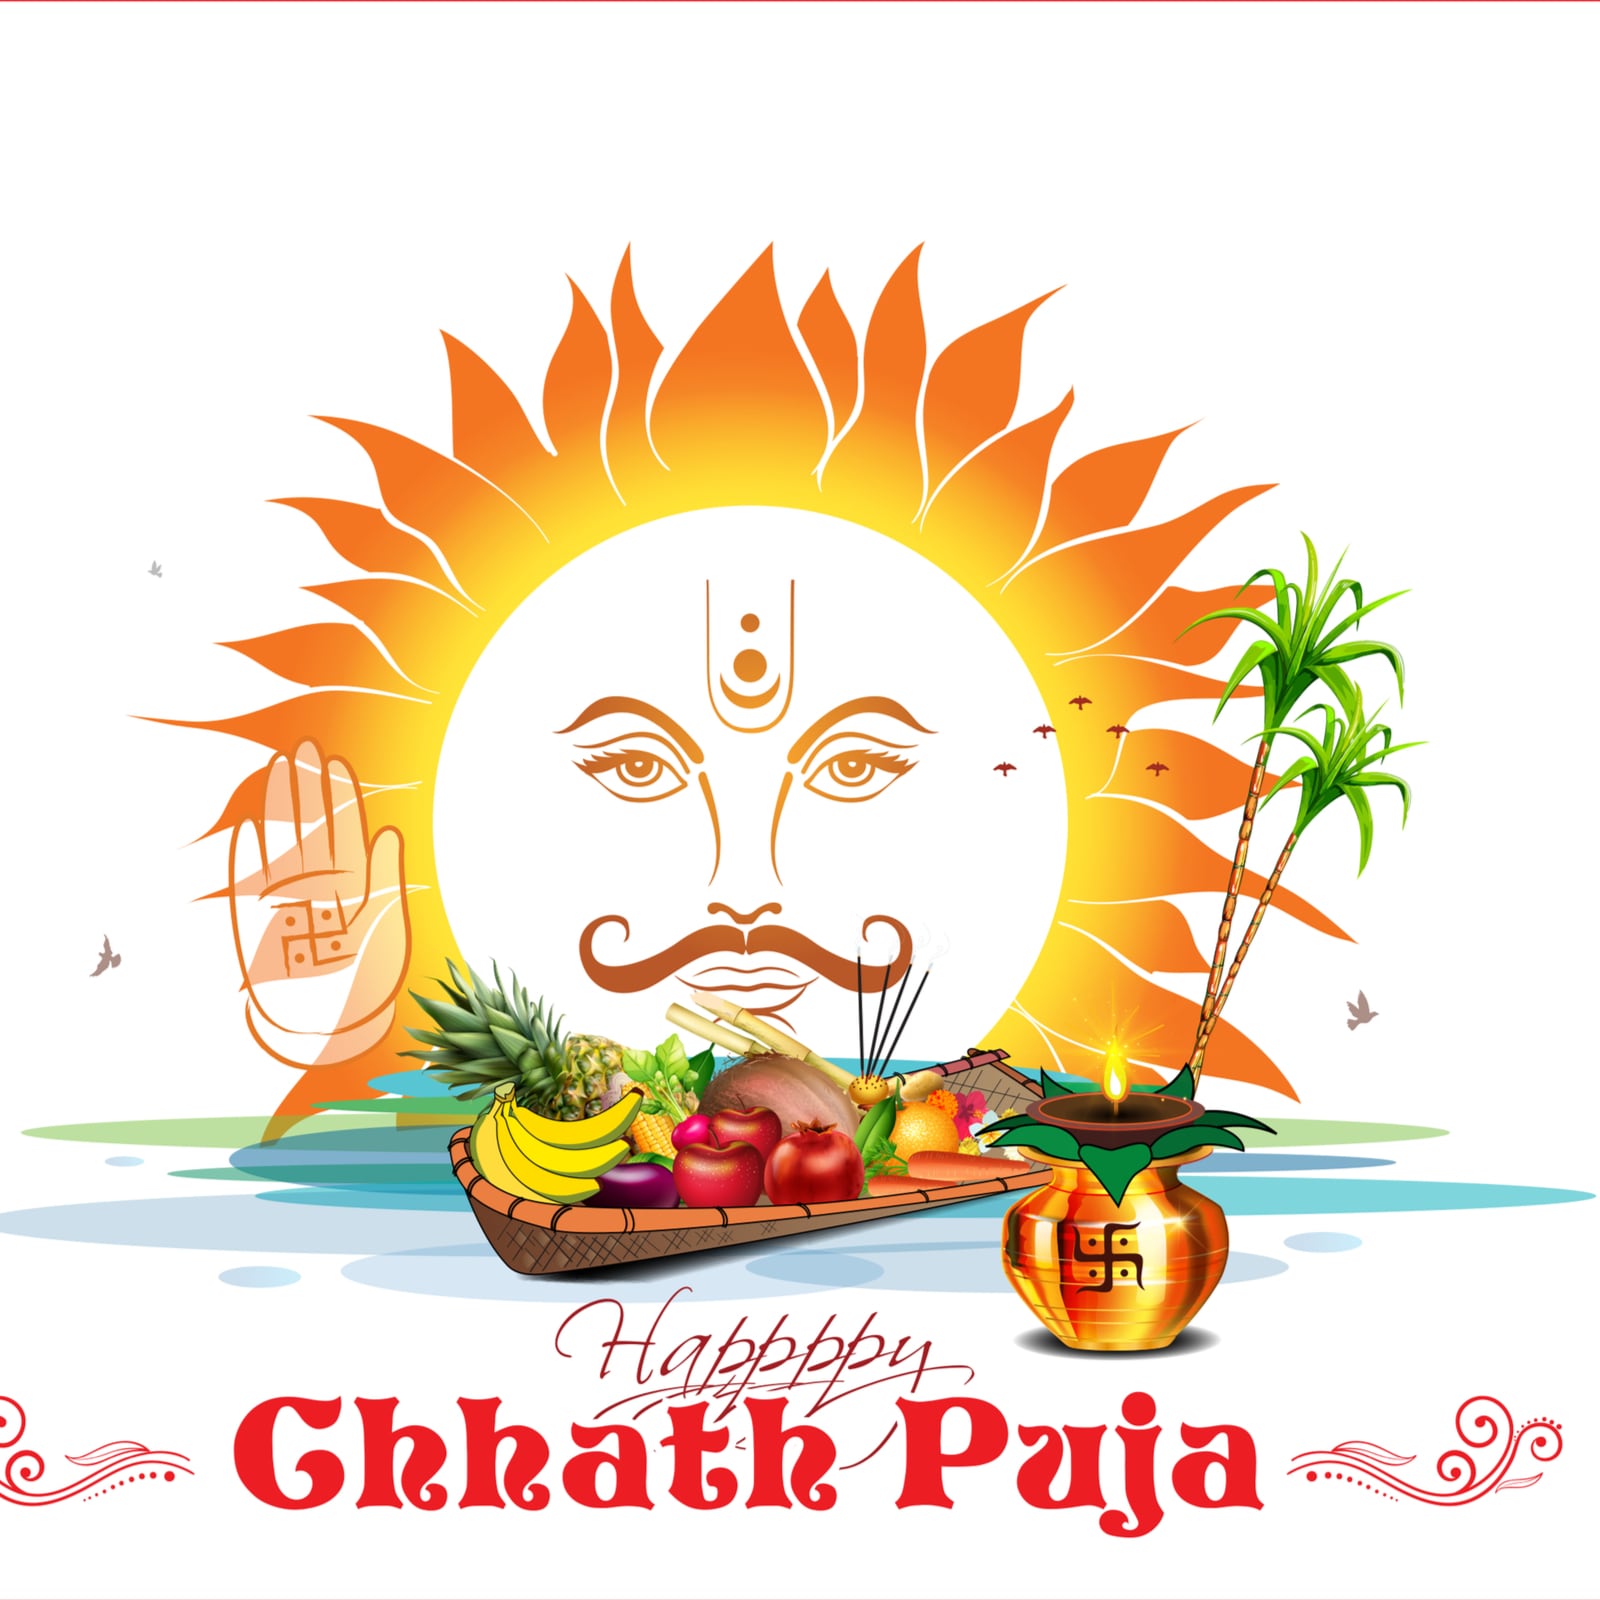 LIC Mutual Fund - May The Positivity Of Chhath Puja Spread... | Facebook